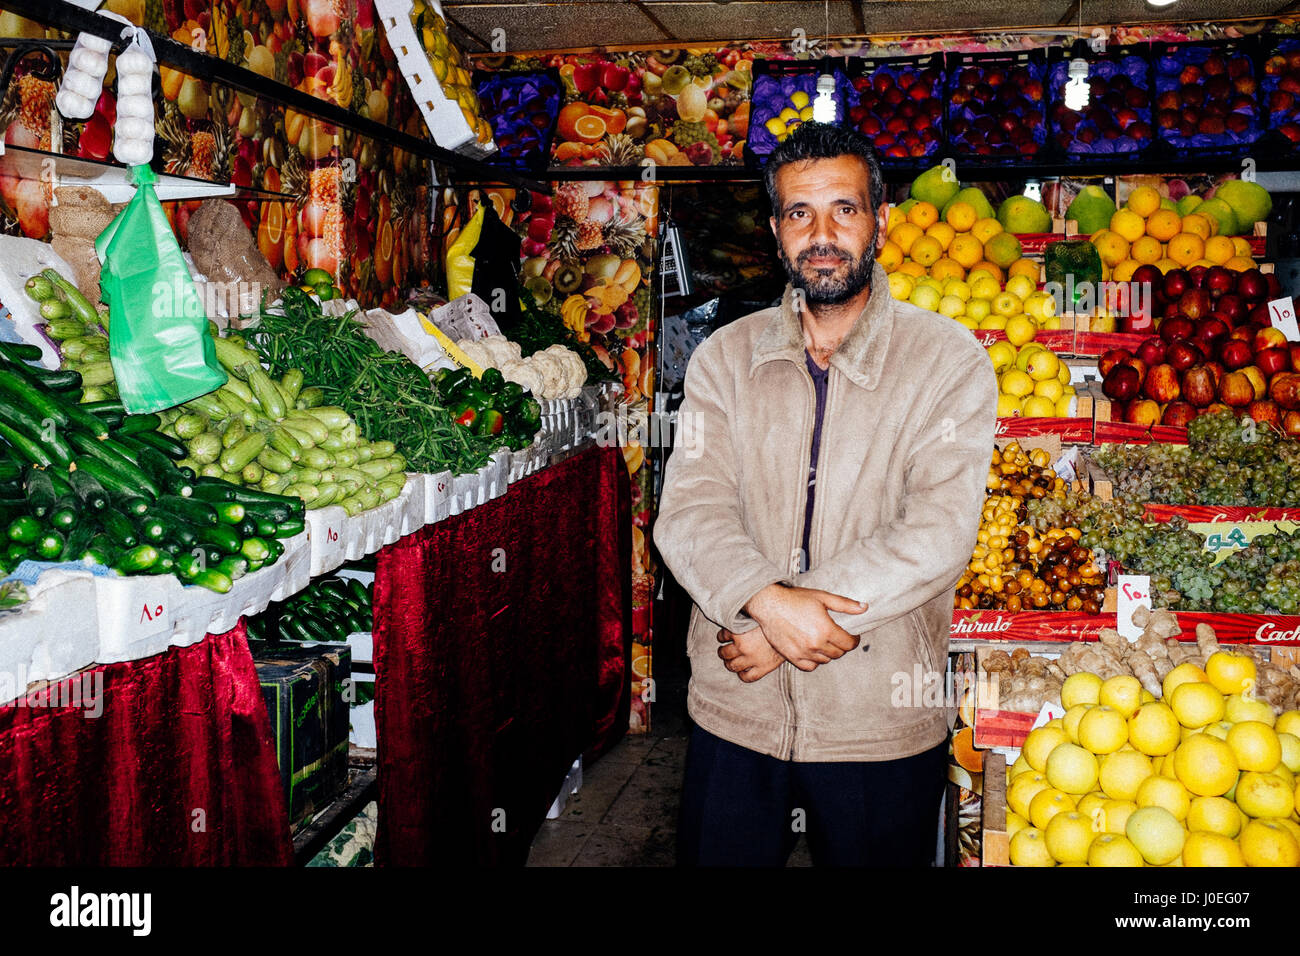 A friendly man is selling fresh vegetables and fruits at the local market in Amman, Jordan. Stock Photo